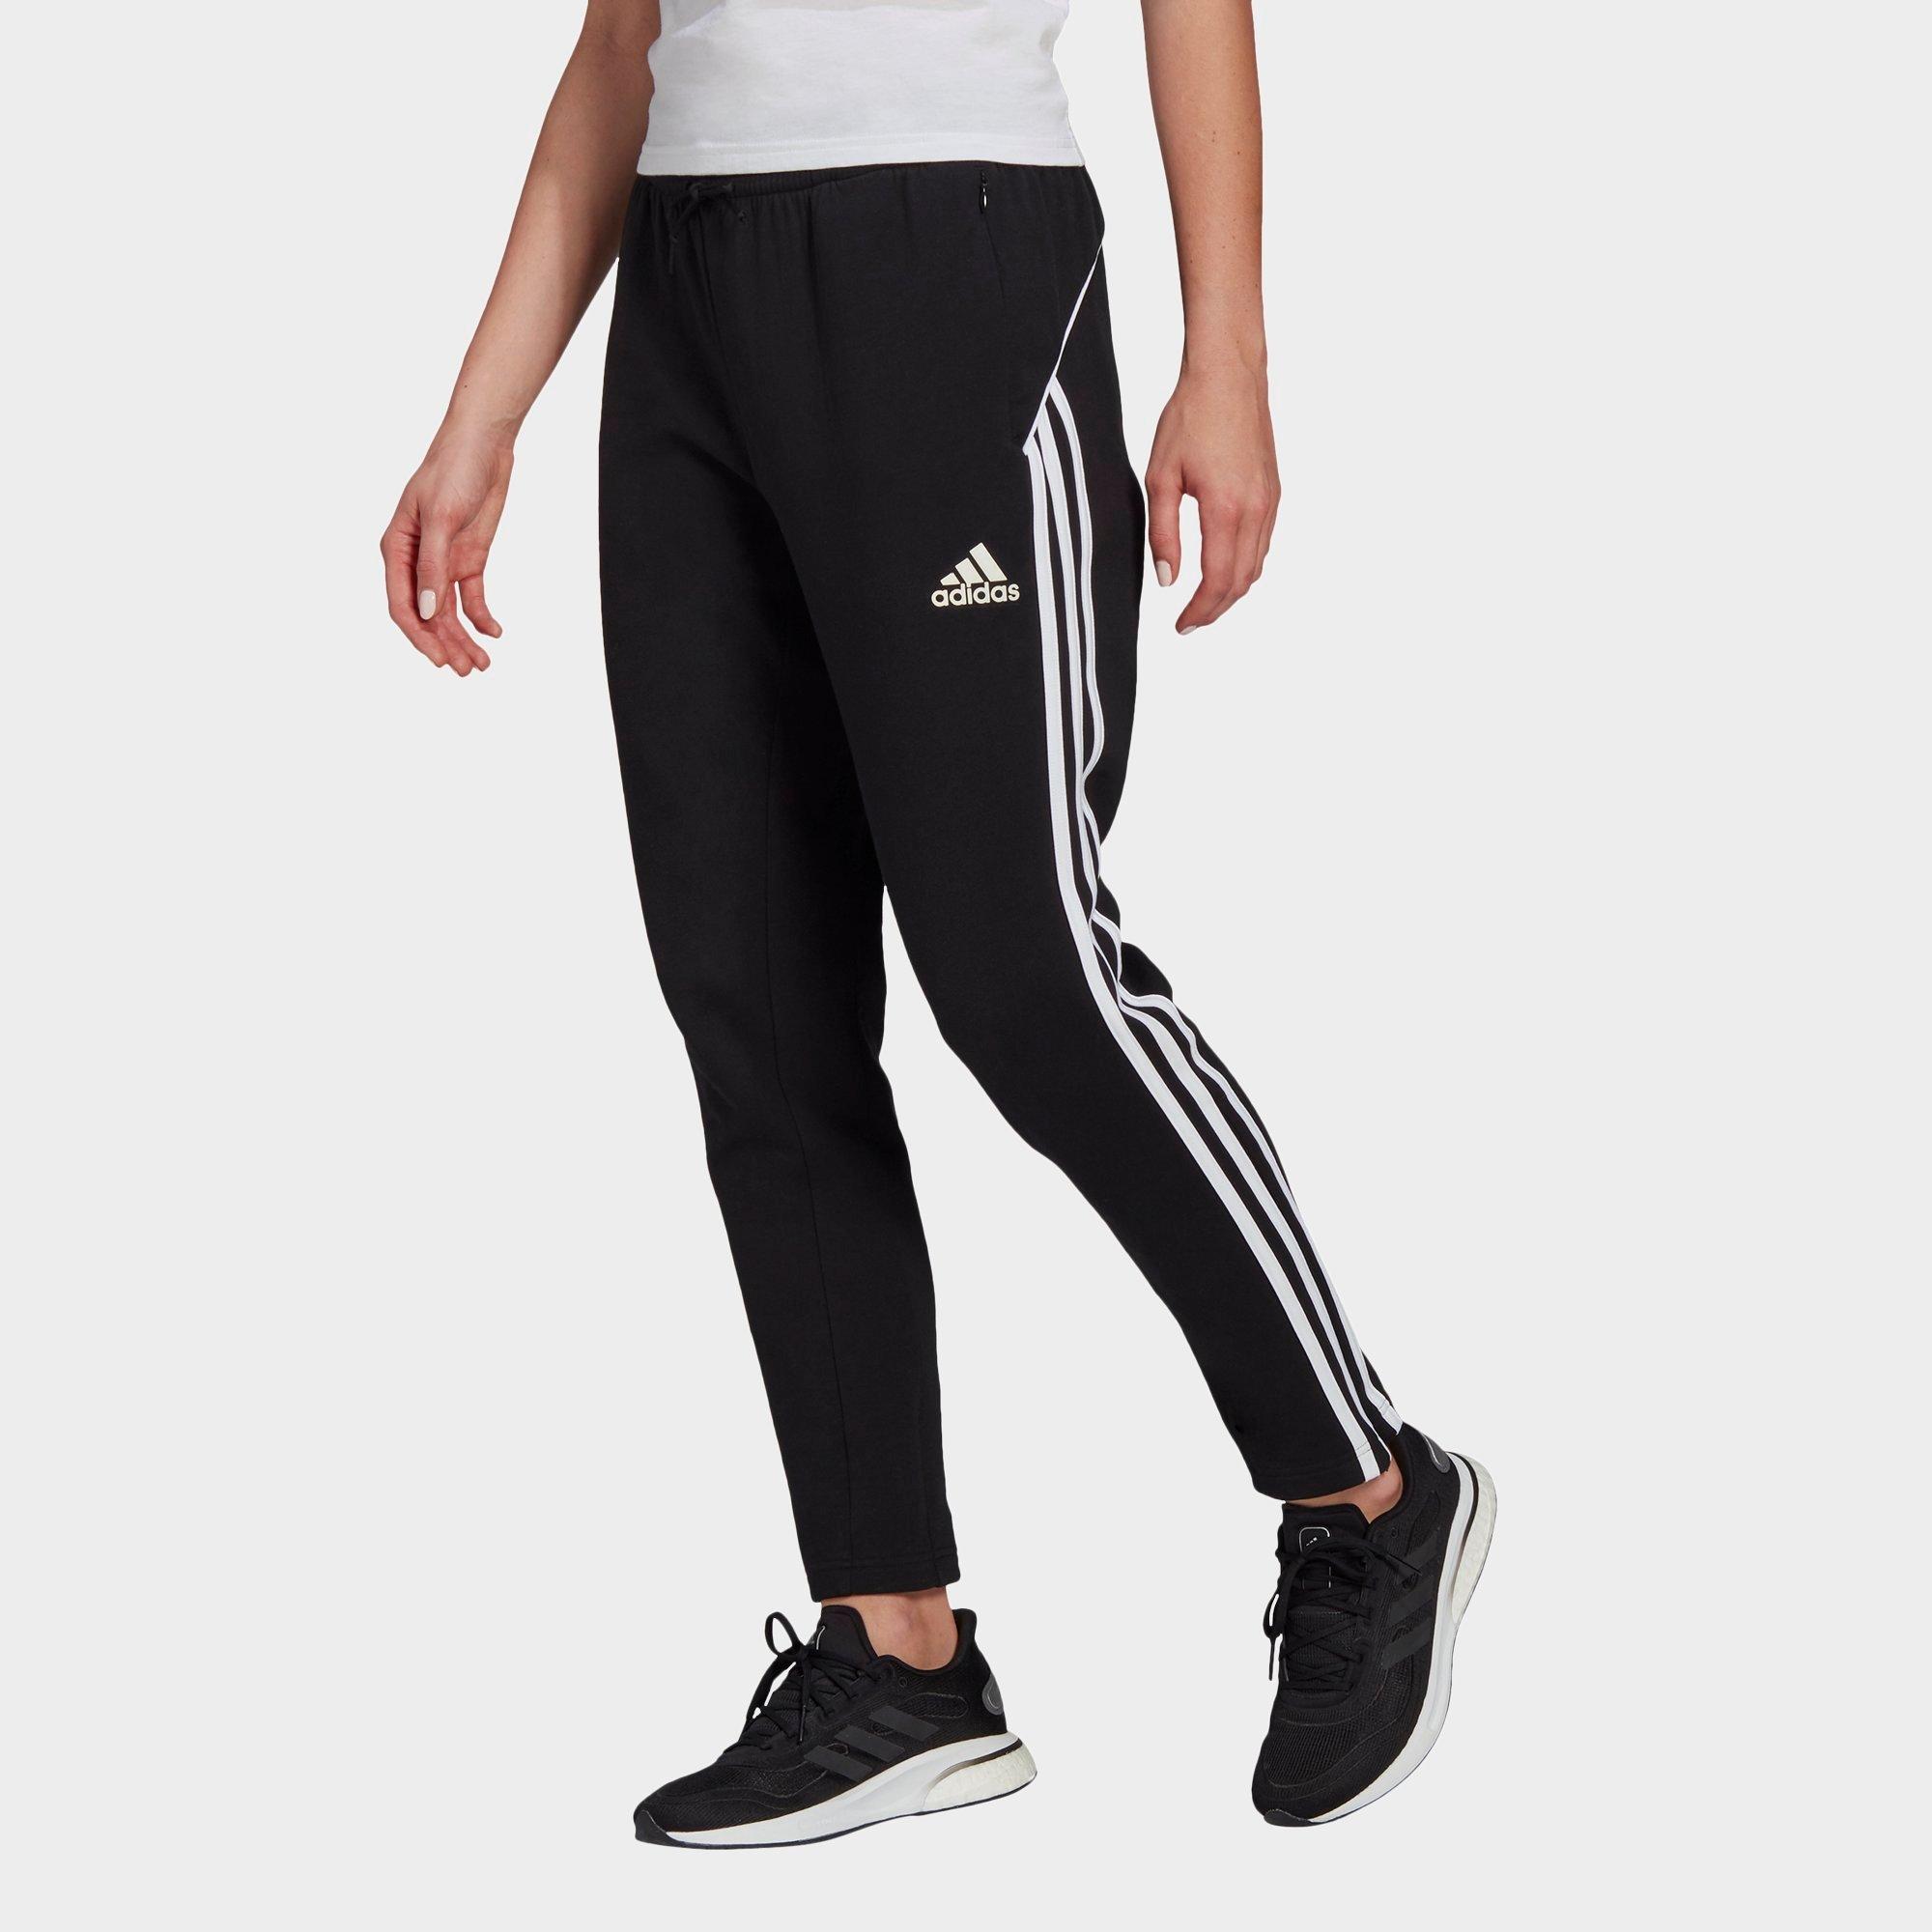 adidas trousers womens